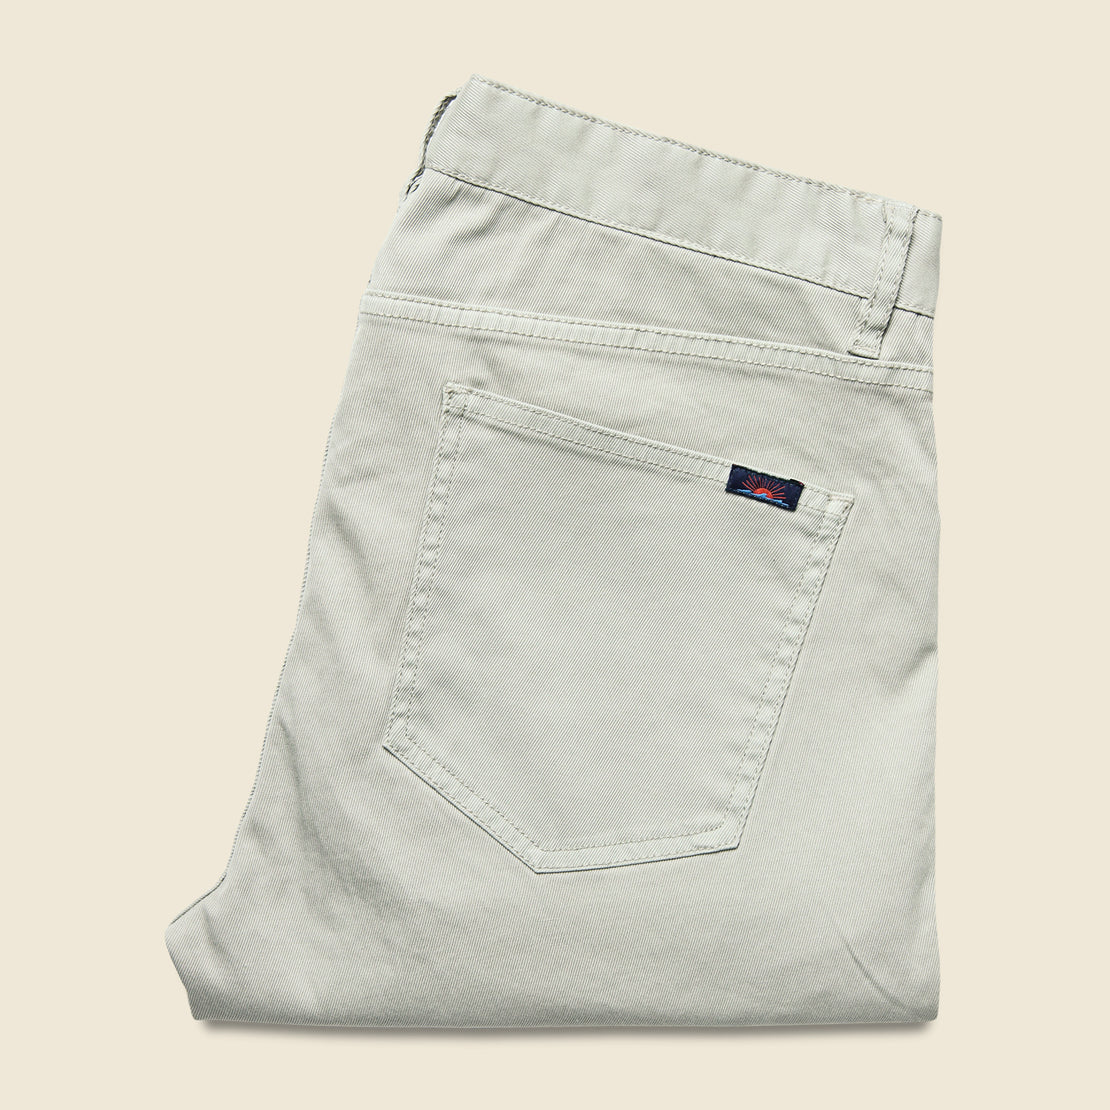 Cavalry Jean - Stone - Faherty - STAG Provisions - Pants - Twill